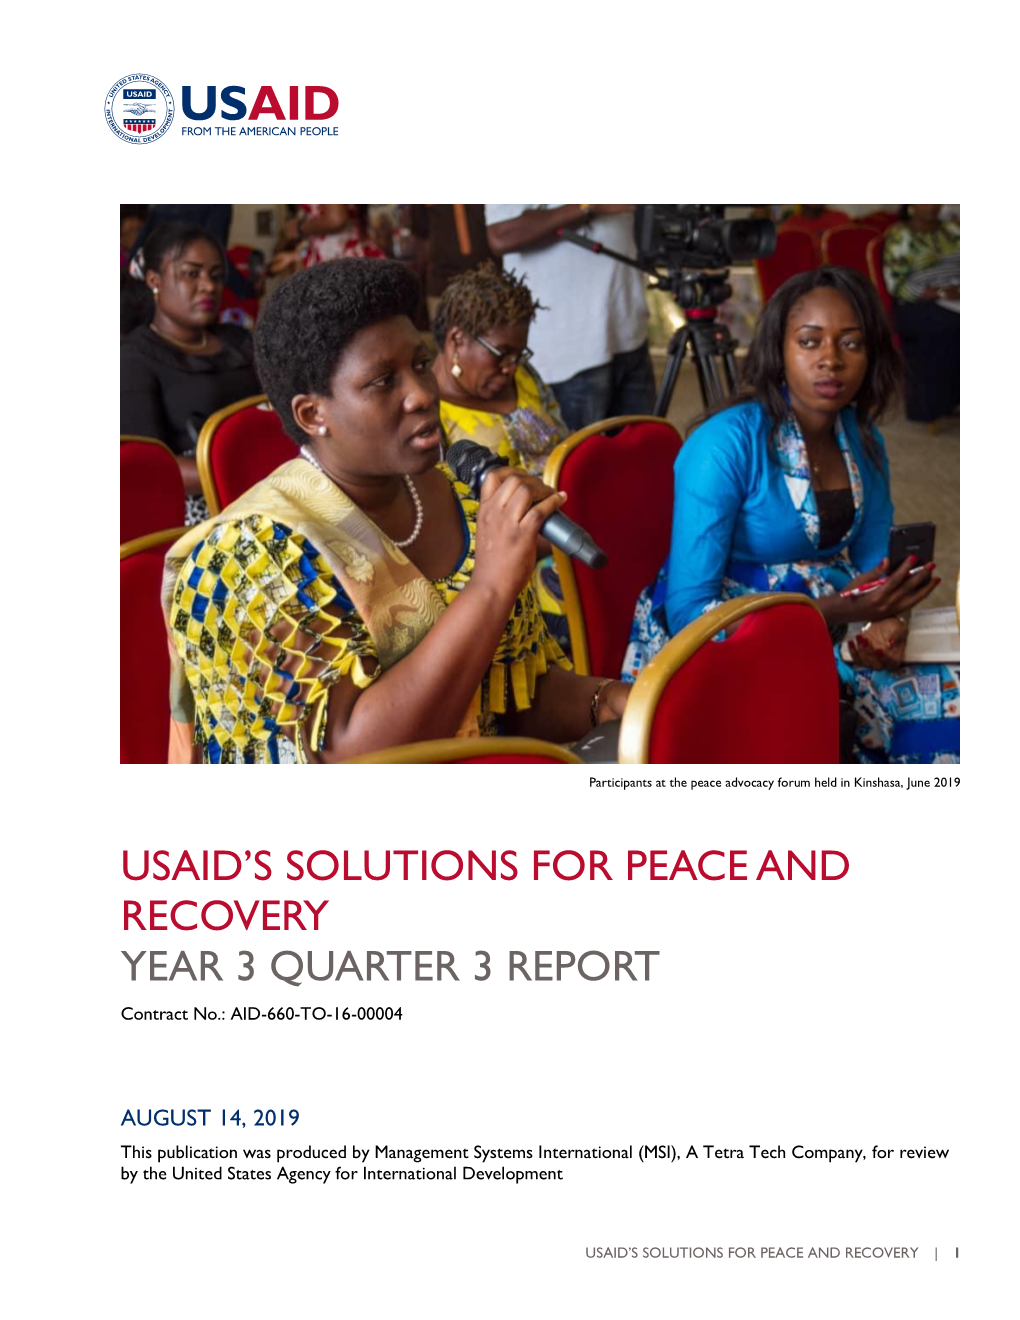 Usaid's Solutions for Peace and Recovery Year 3